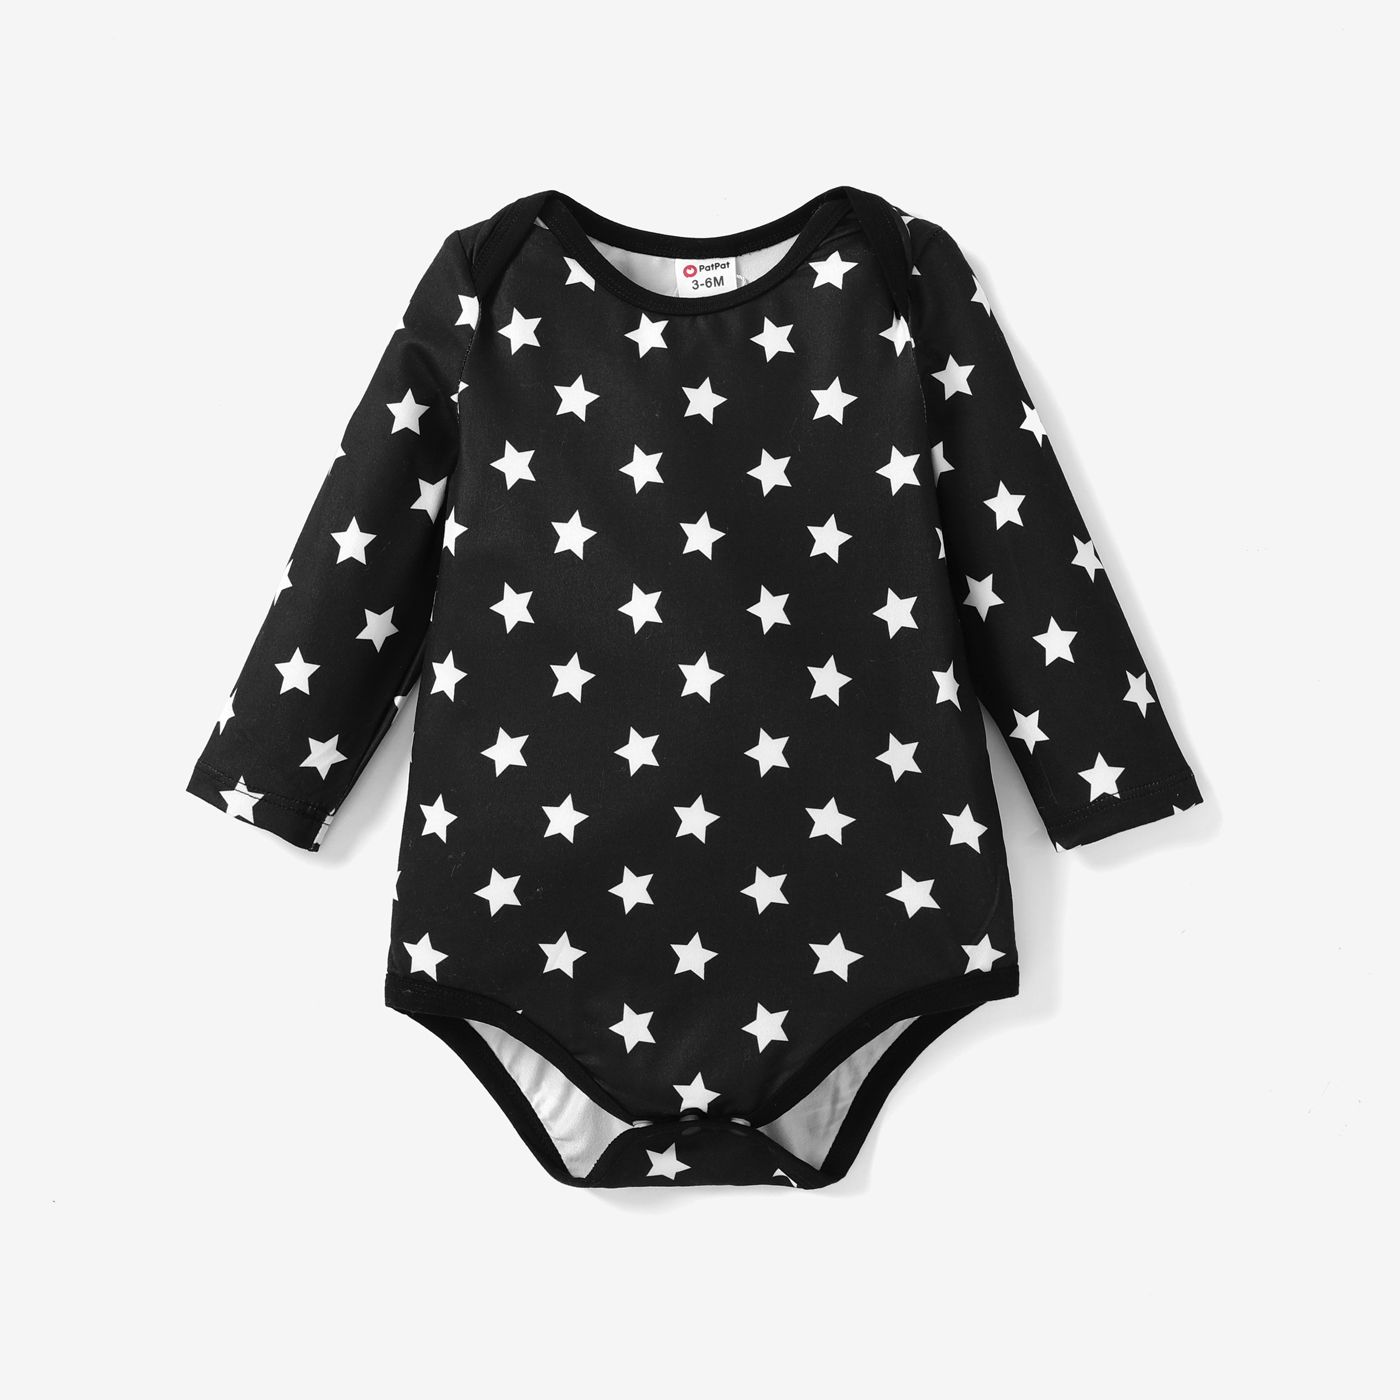 Baby Boy Cotton Casual Long Sleeve Romper